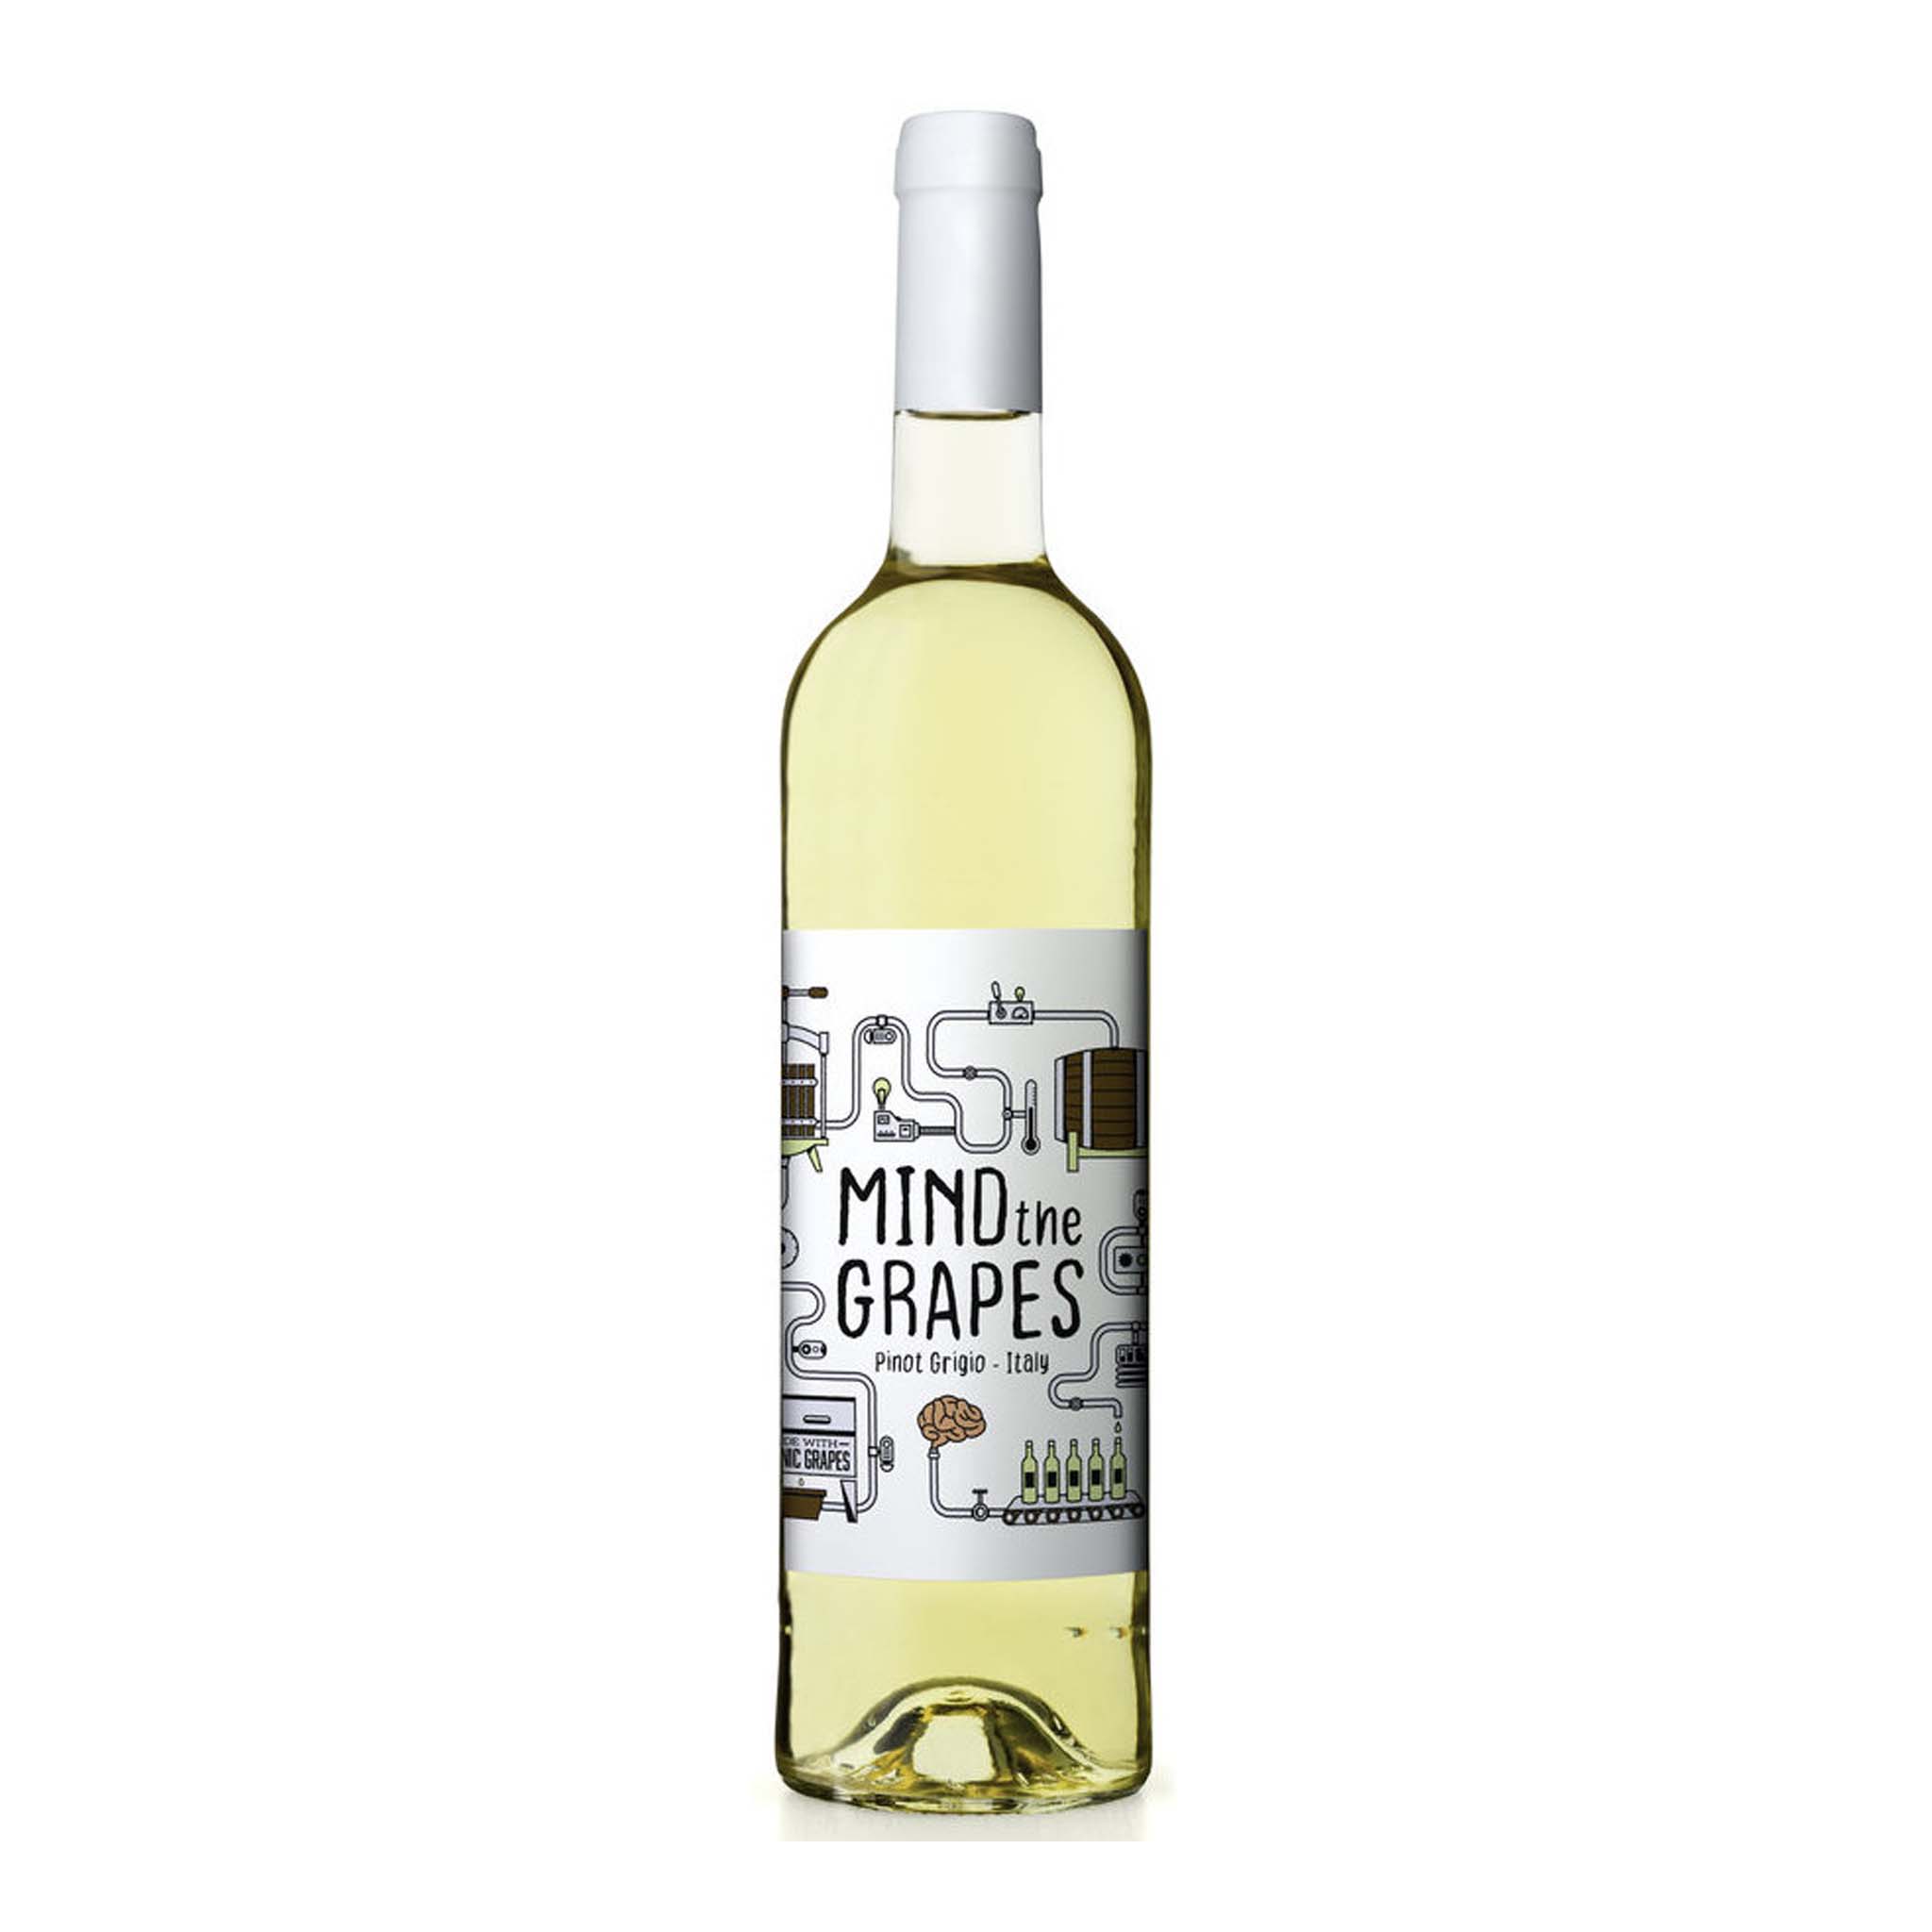 Mind the Grapes – Pinot Grigio